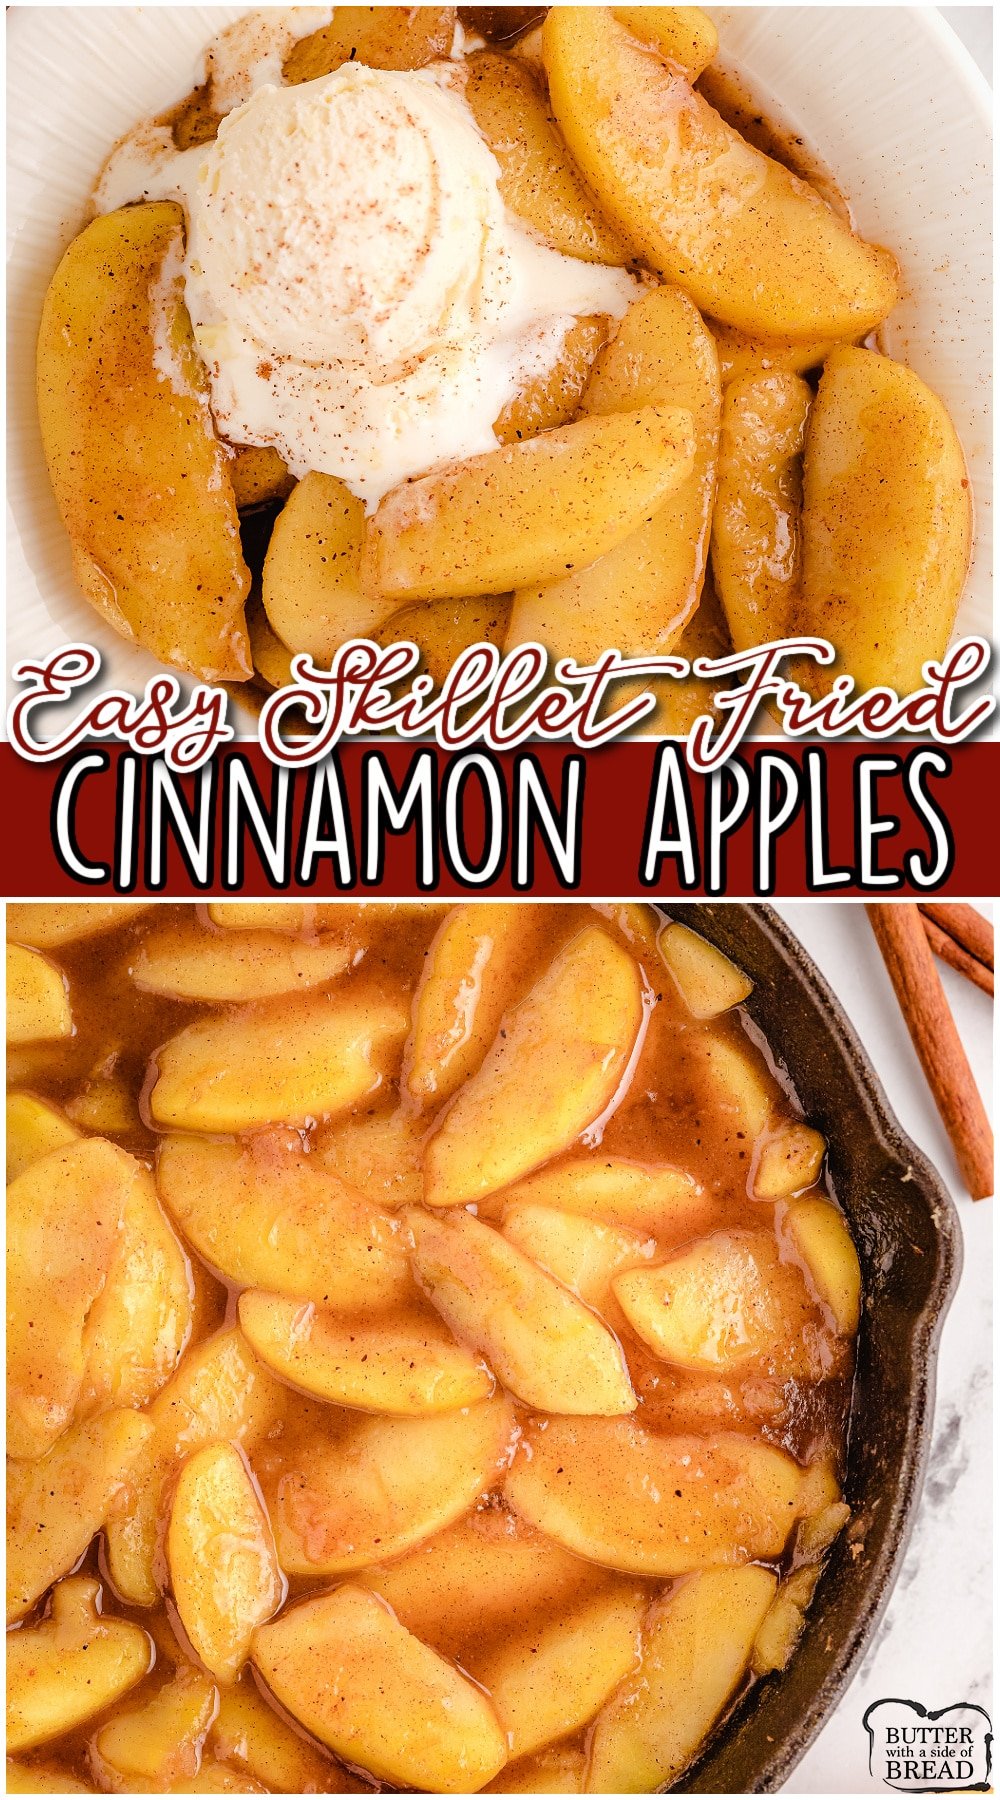 Fried Cinnamon Apples are so simple to make! Made with crisp apples, butter, brown sugar, cinnamon & nutmeg; they make a fantastic side dish or dessert!